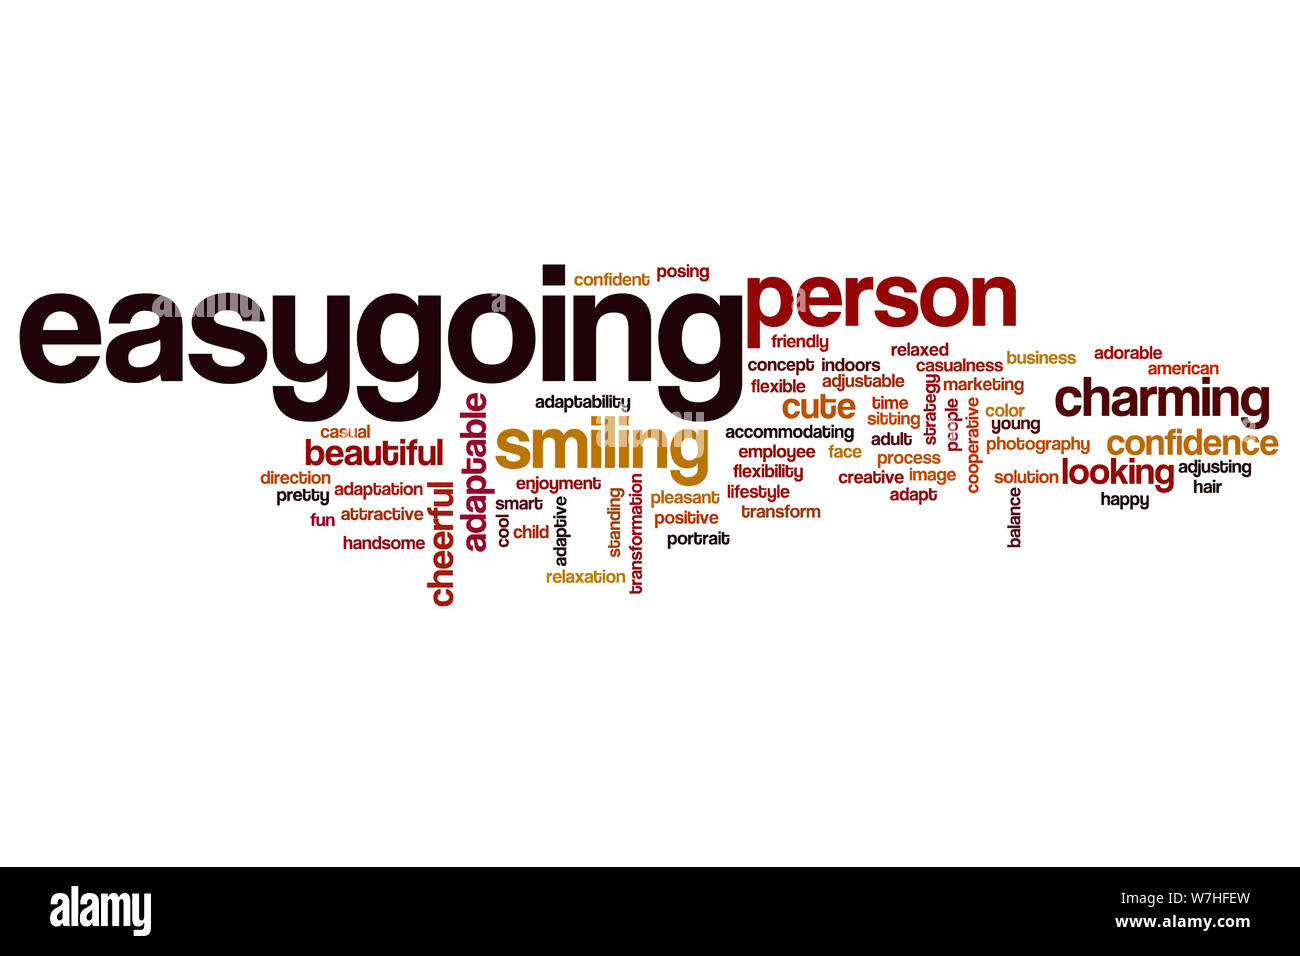 Easygoing word cloud concept Stock Photo